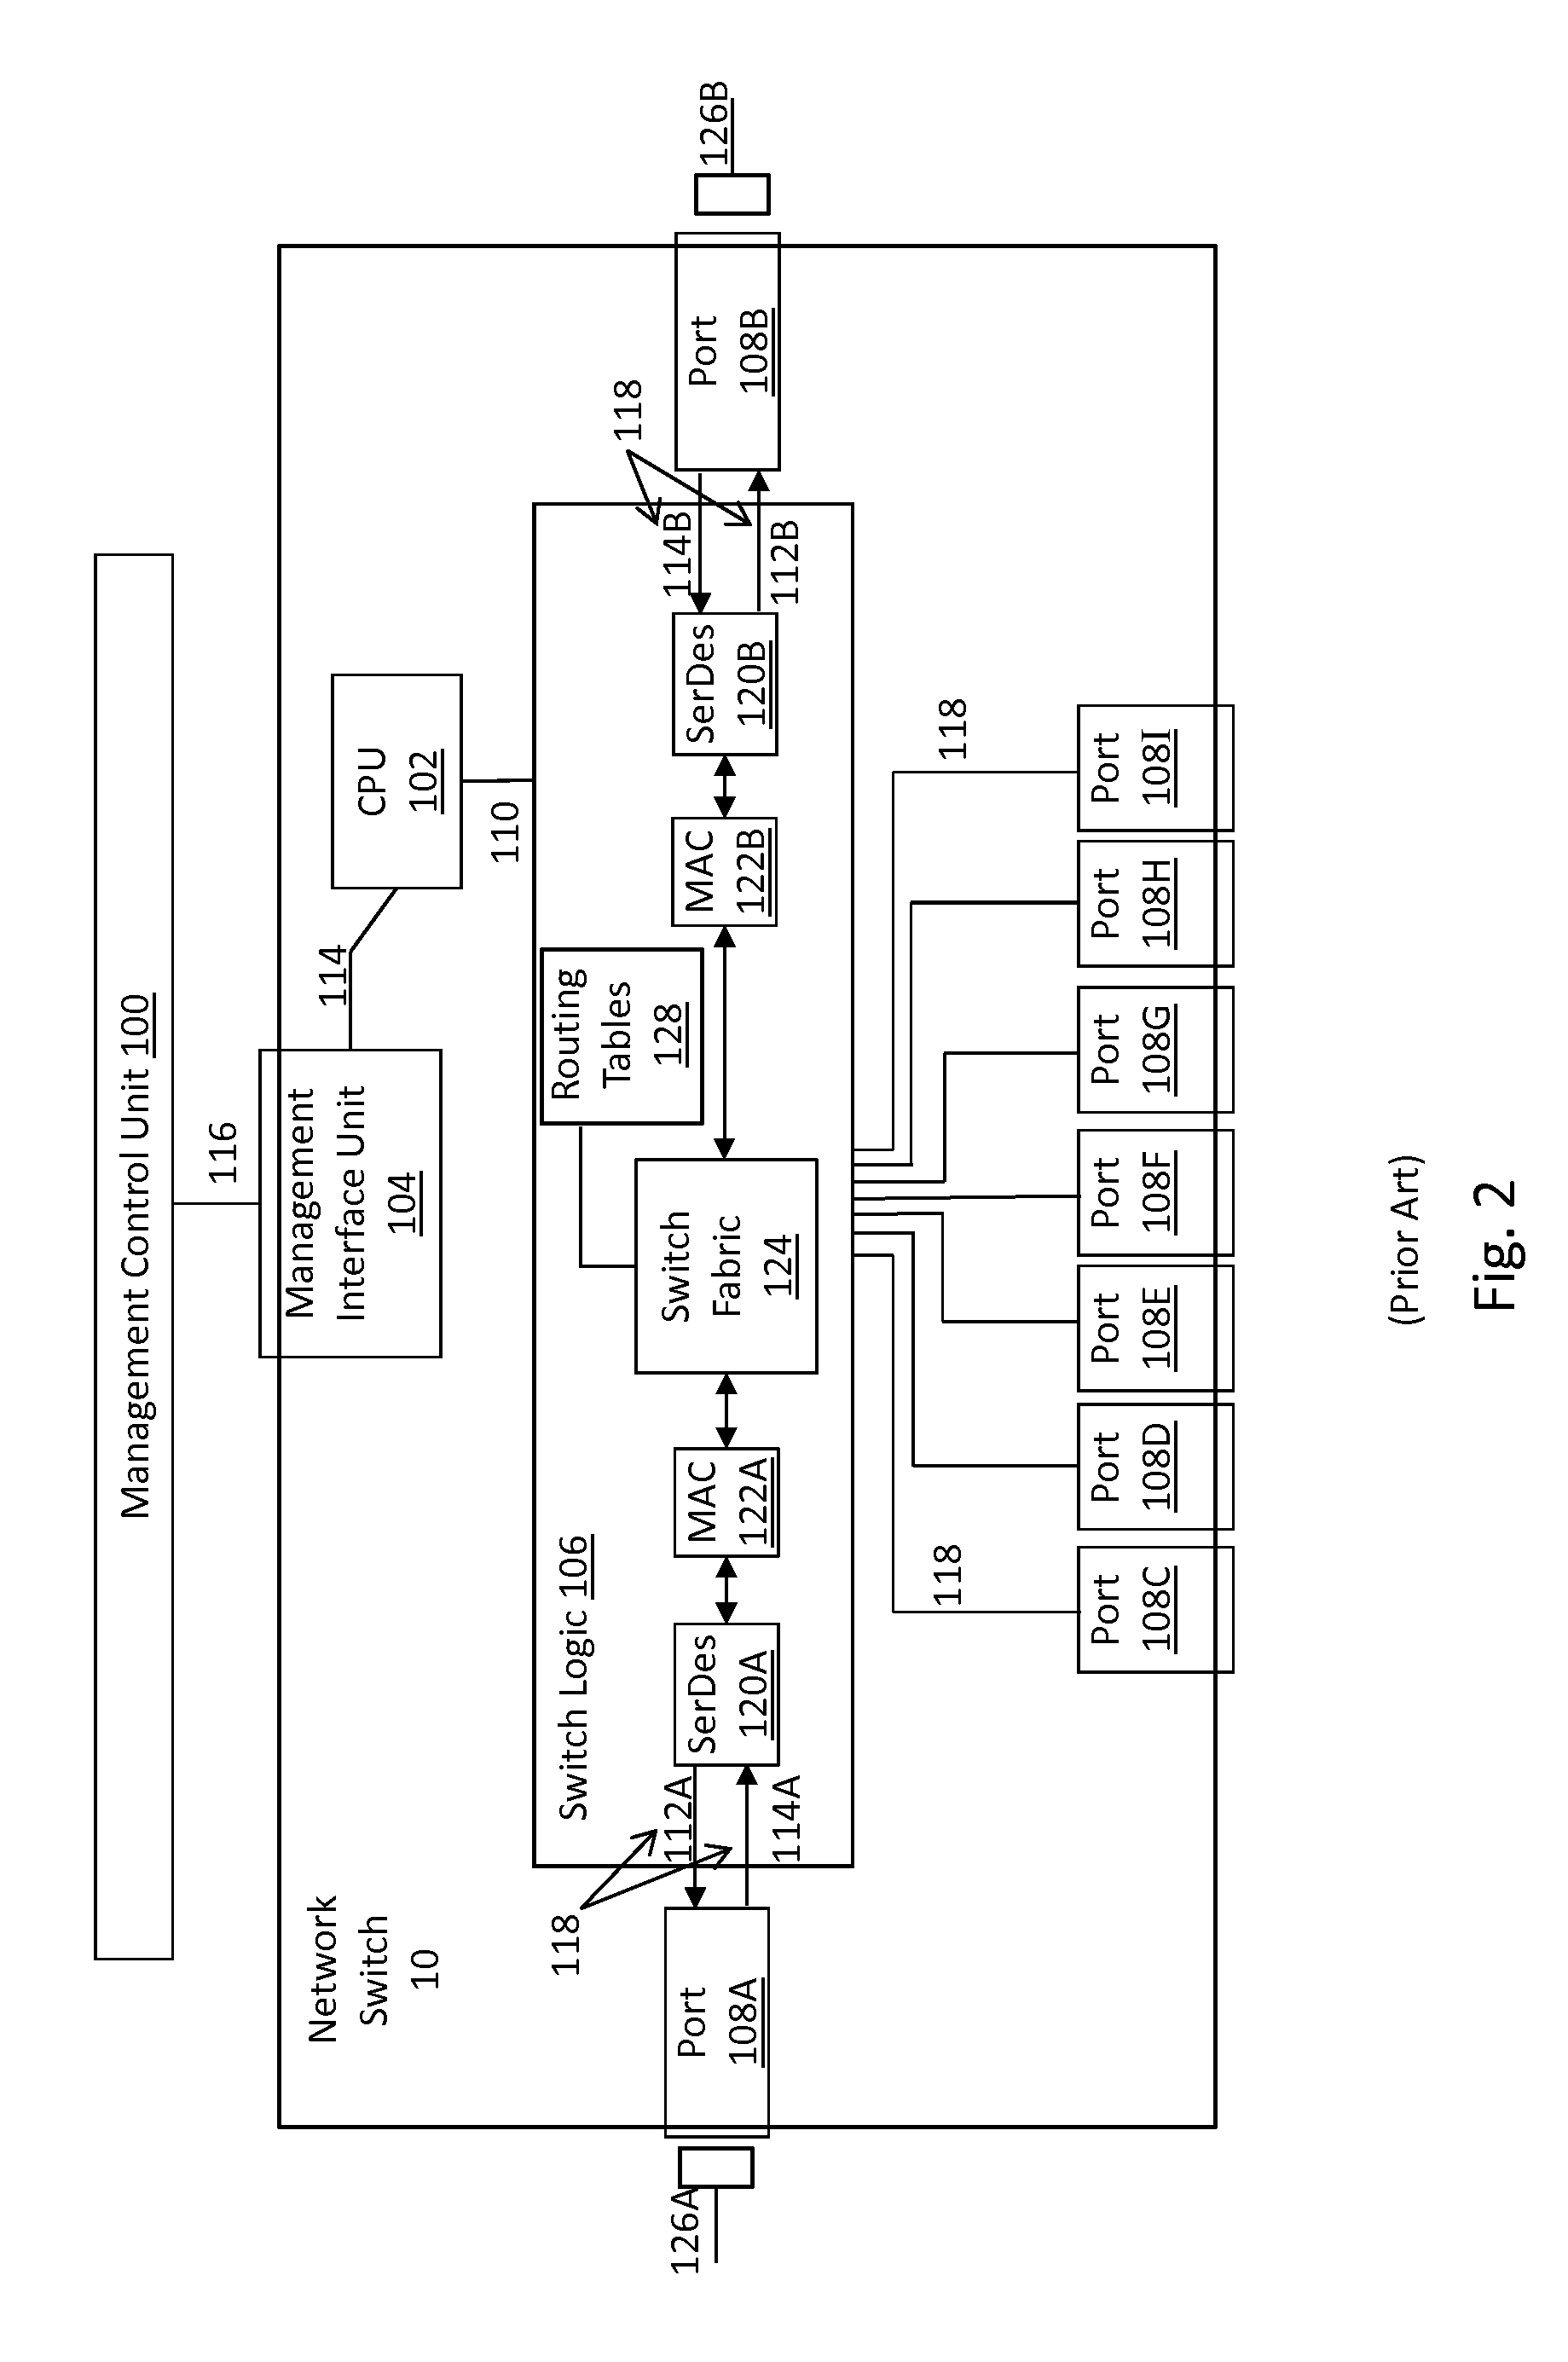 Data center path switch with improved path interconnection architecture